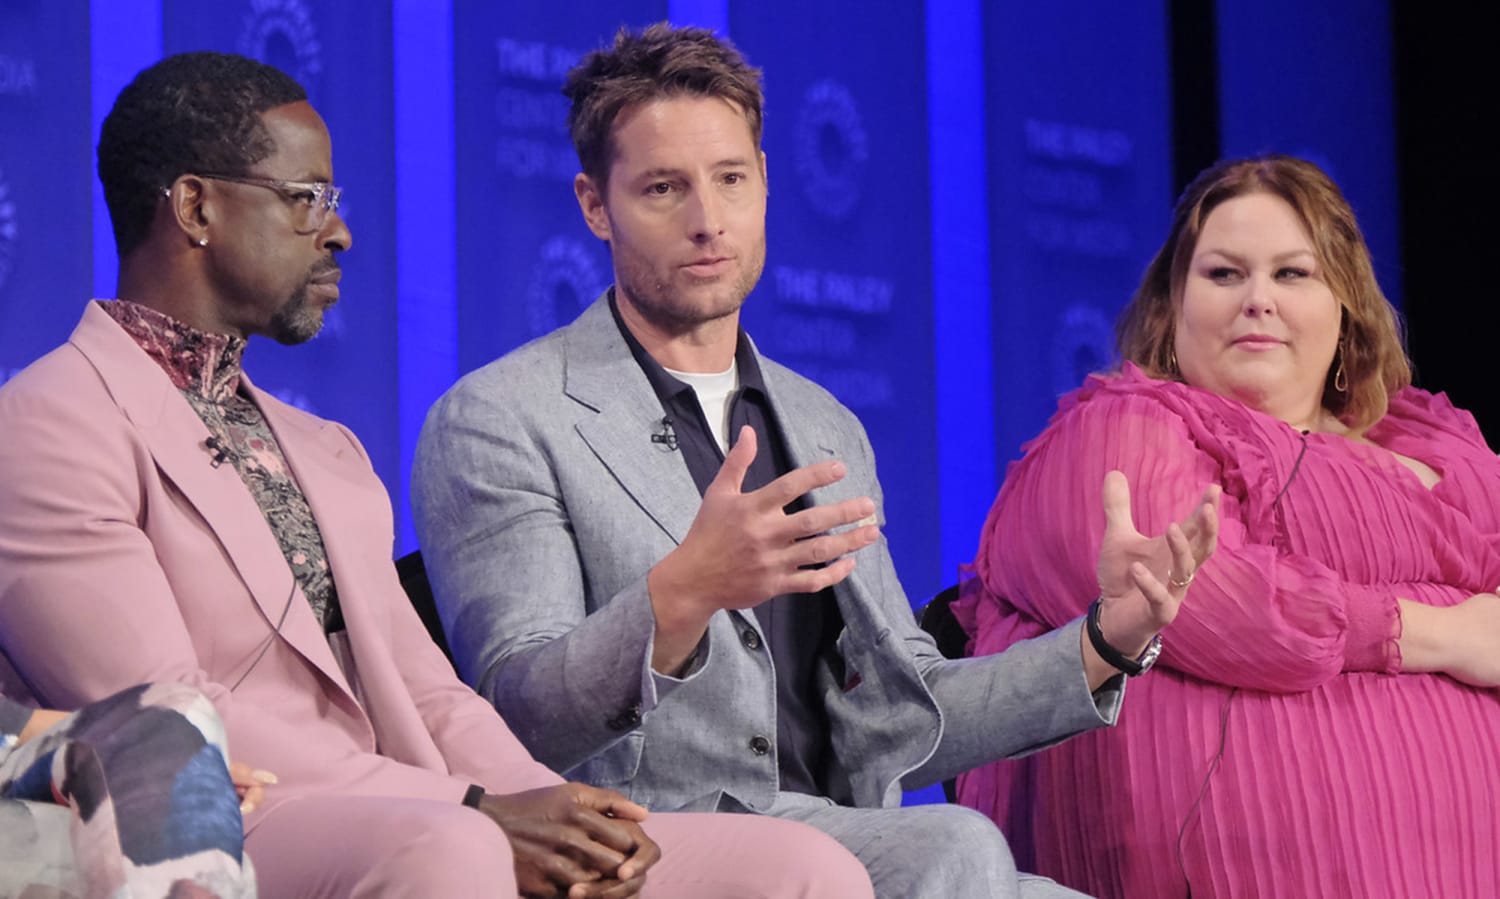 This Is Us' stars Mandy Moore, Sterling K. Brown and rest of cast get  emotional about final season